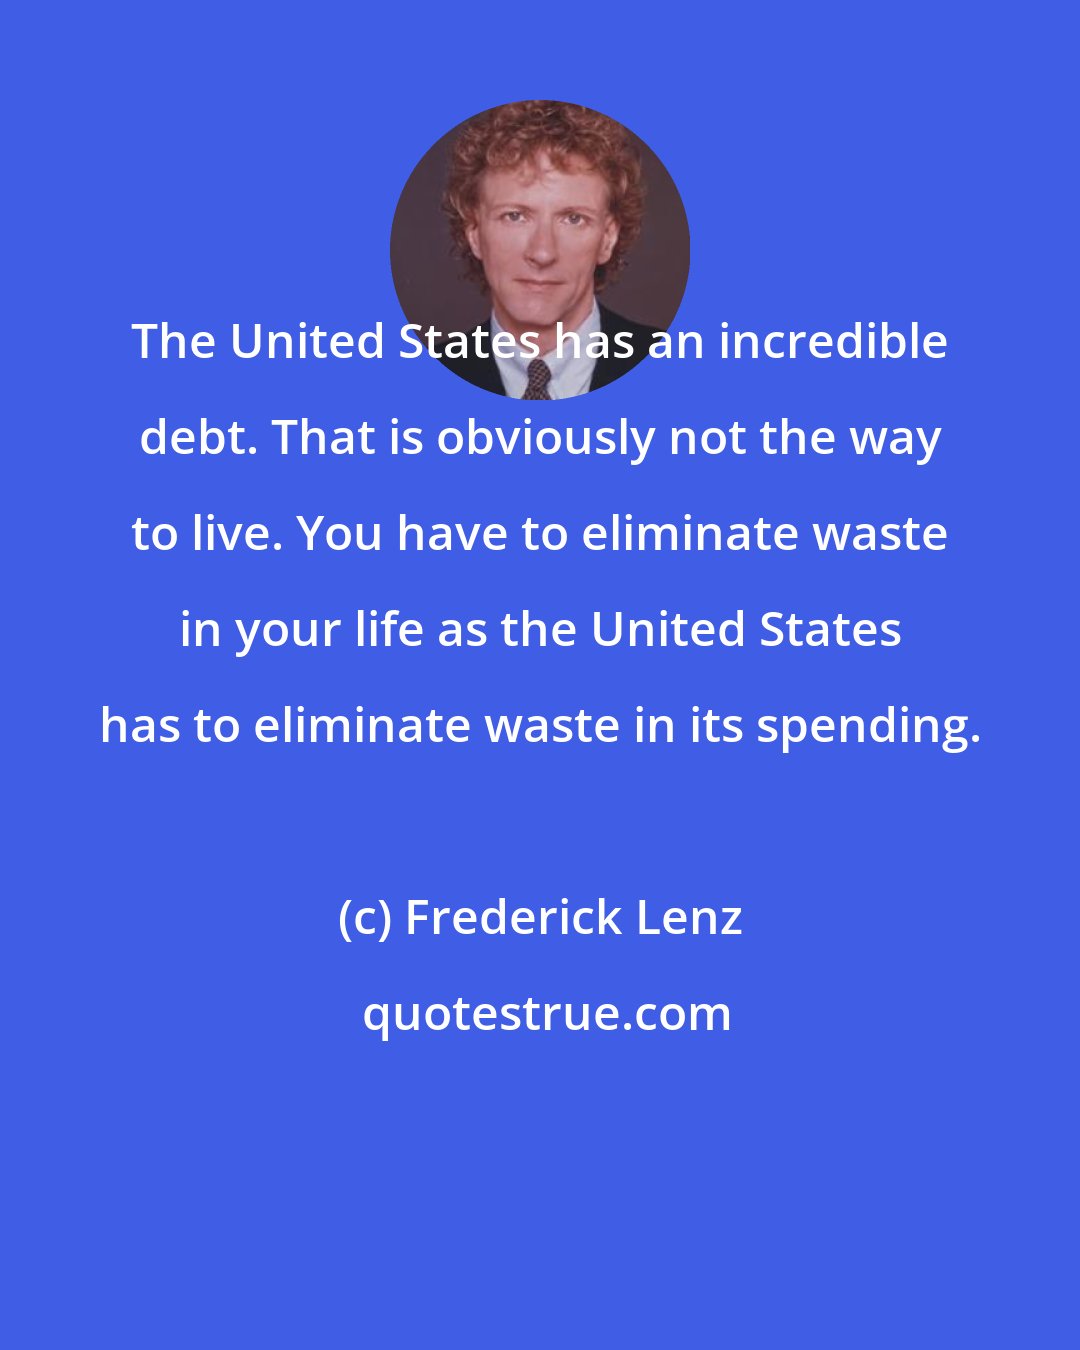 Frederick Lenz: The United States has an incredible debt. That is obviously not the way to live. You have to eliminate waste in your life as the United States has to eliminate waste in its spending.